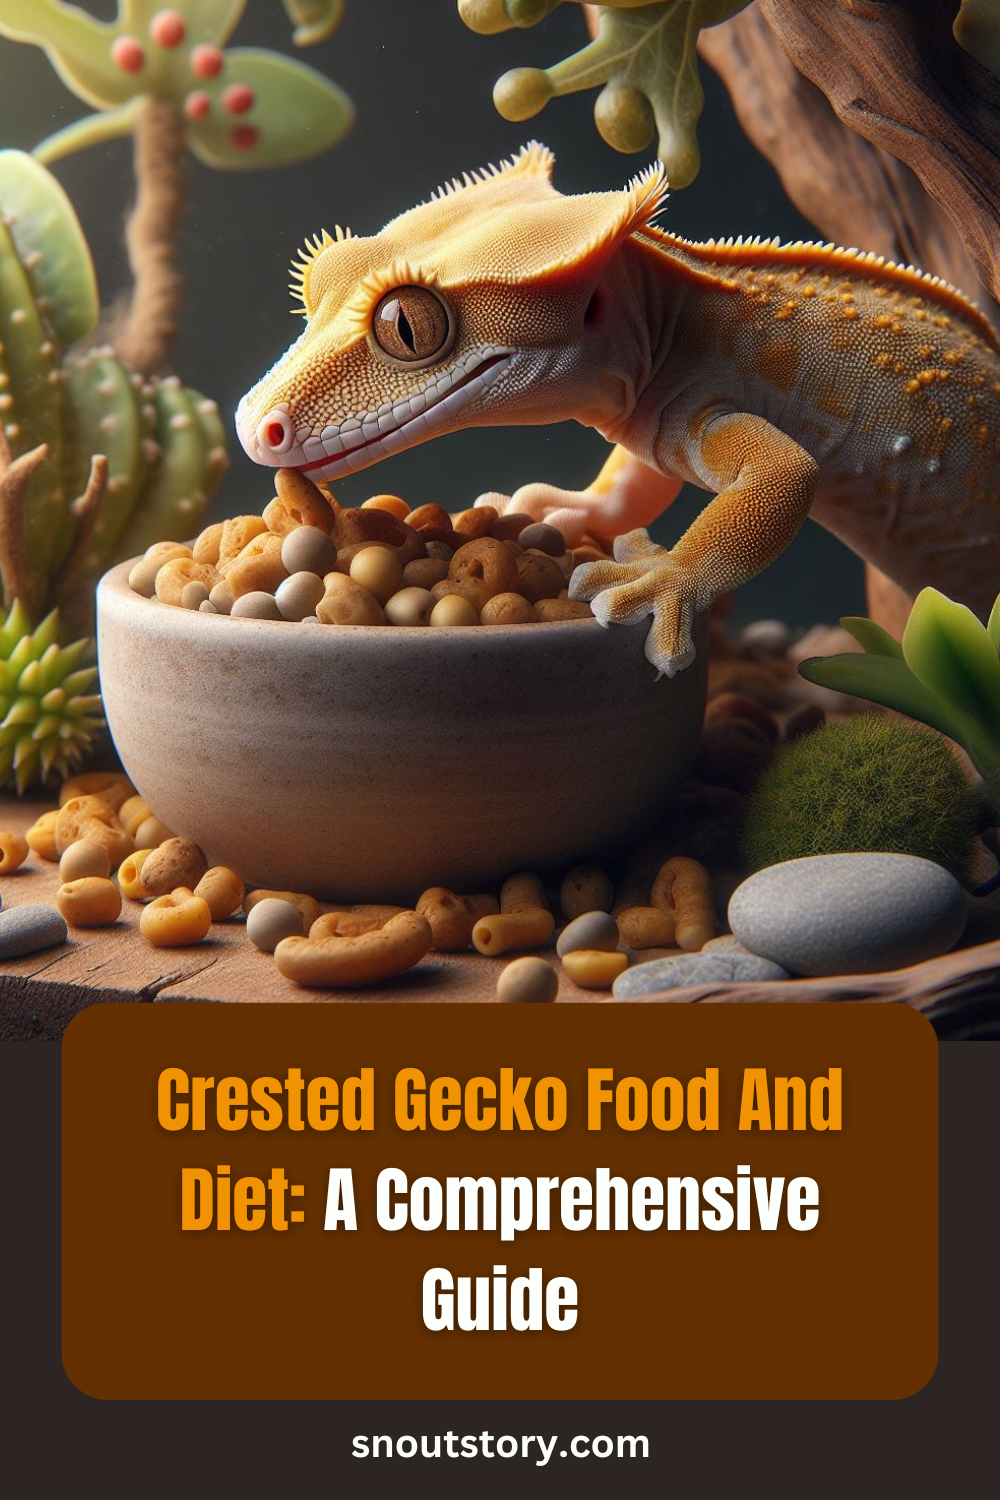 Crested Gecko Food And Diet: A Comprehensive Guide